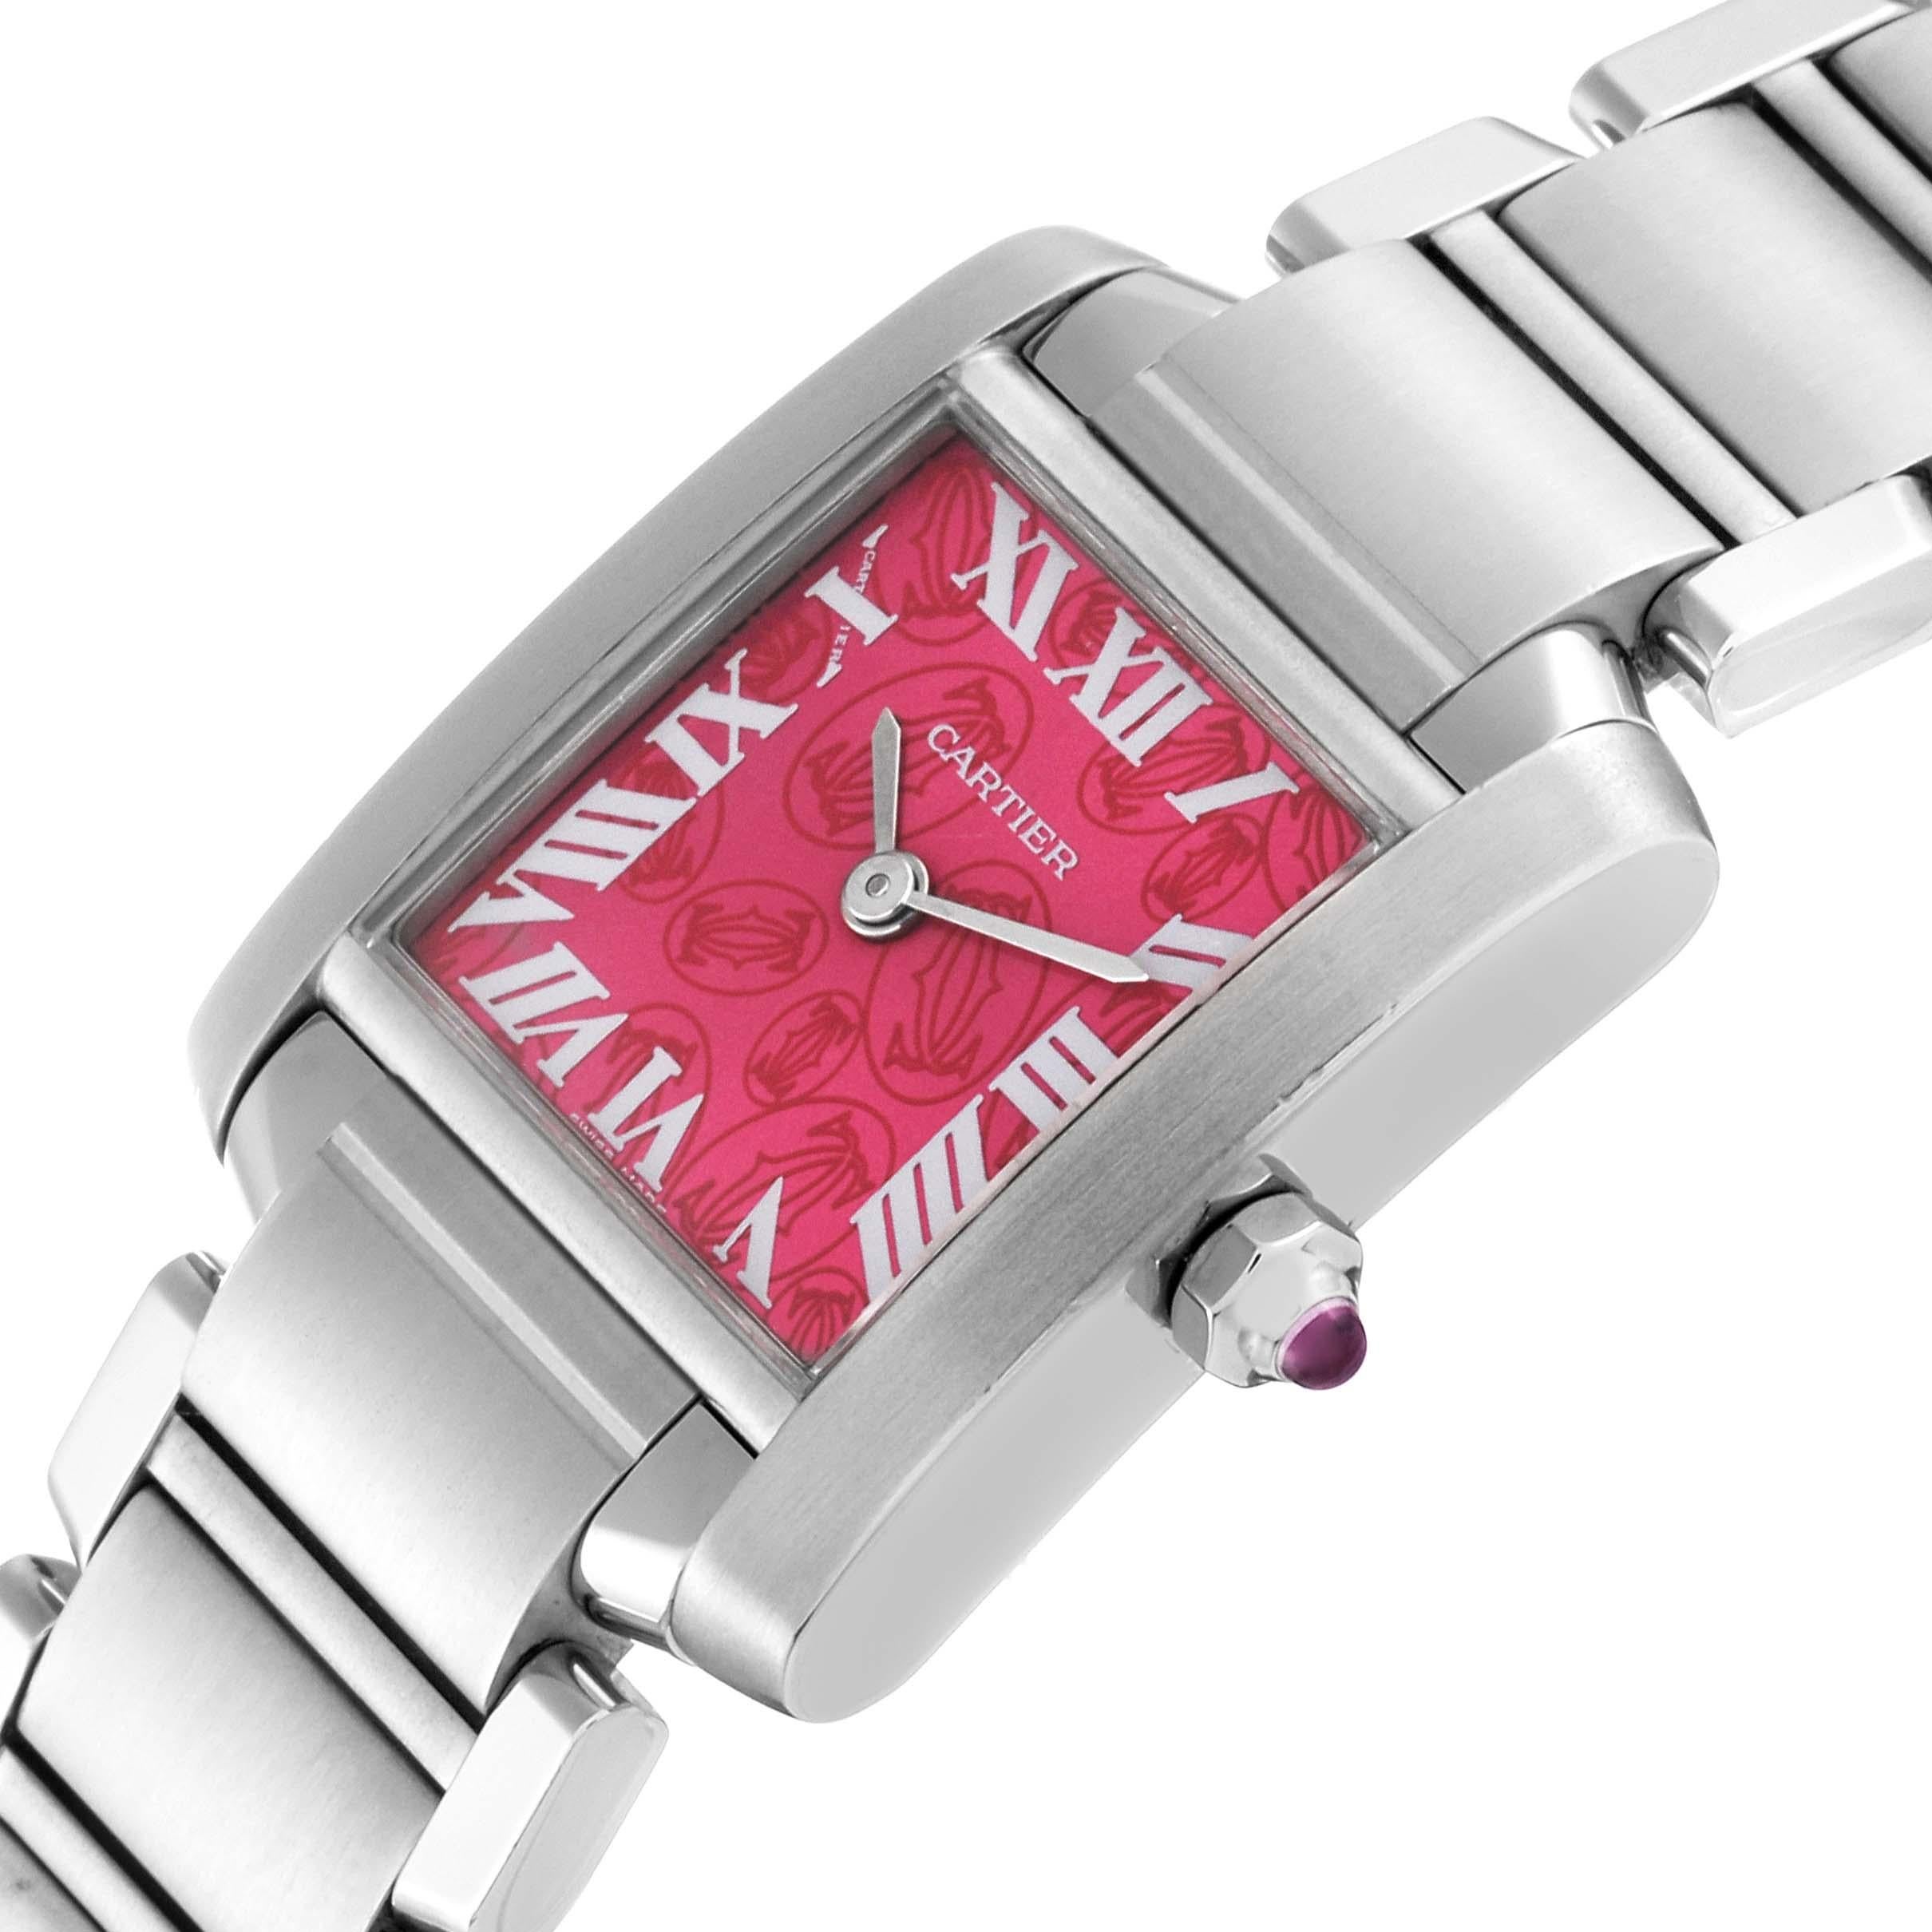 Cartier Tank Francaise Raspberry Dial Limited Edition Steel Watch W51030Q3 For Sale 3